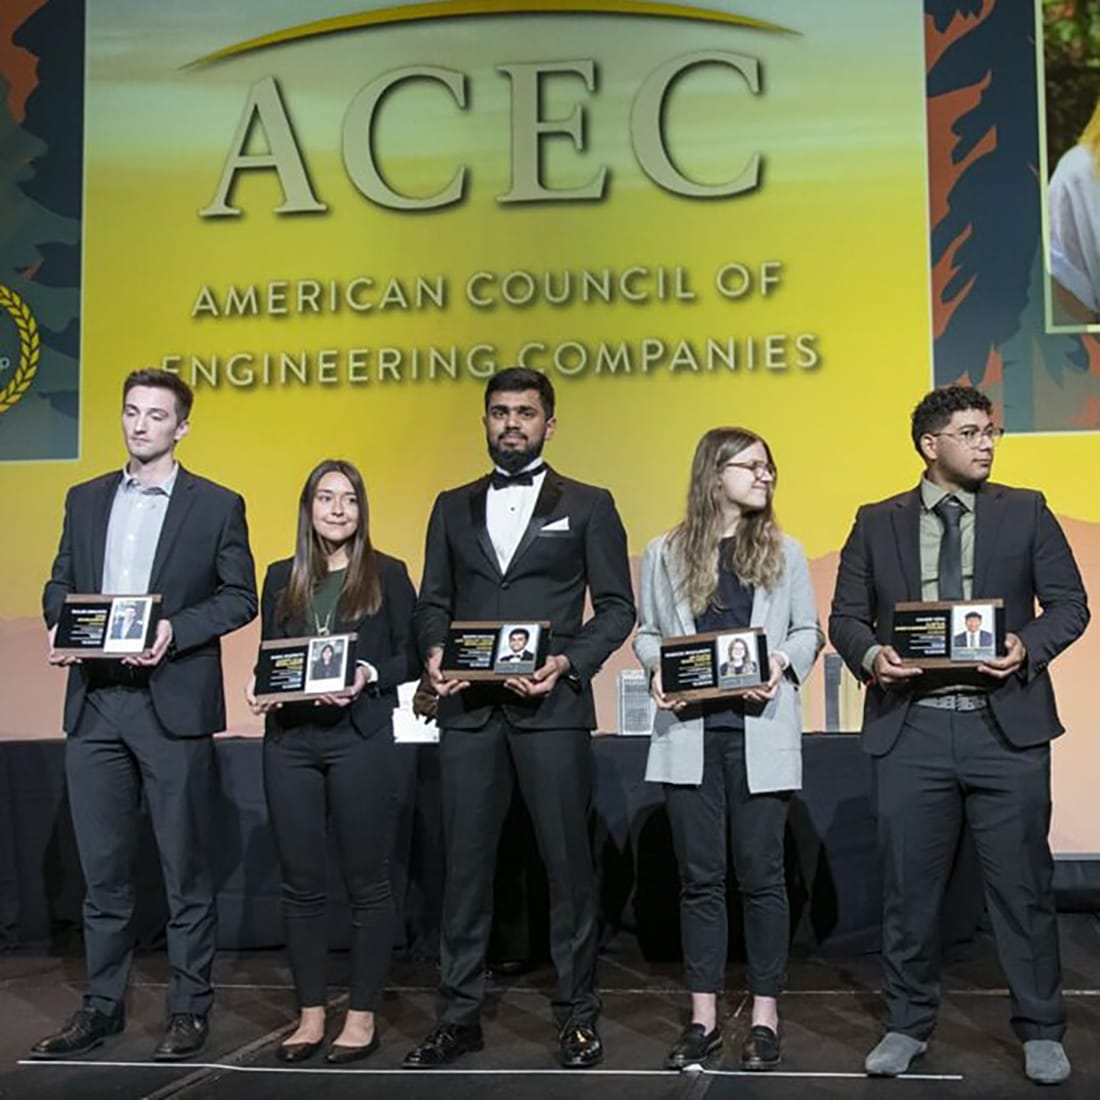 ACEC Scholars holding their certifications